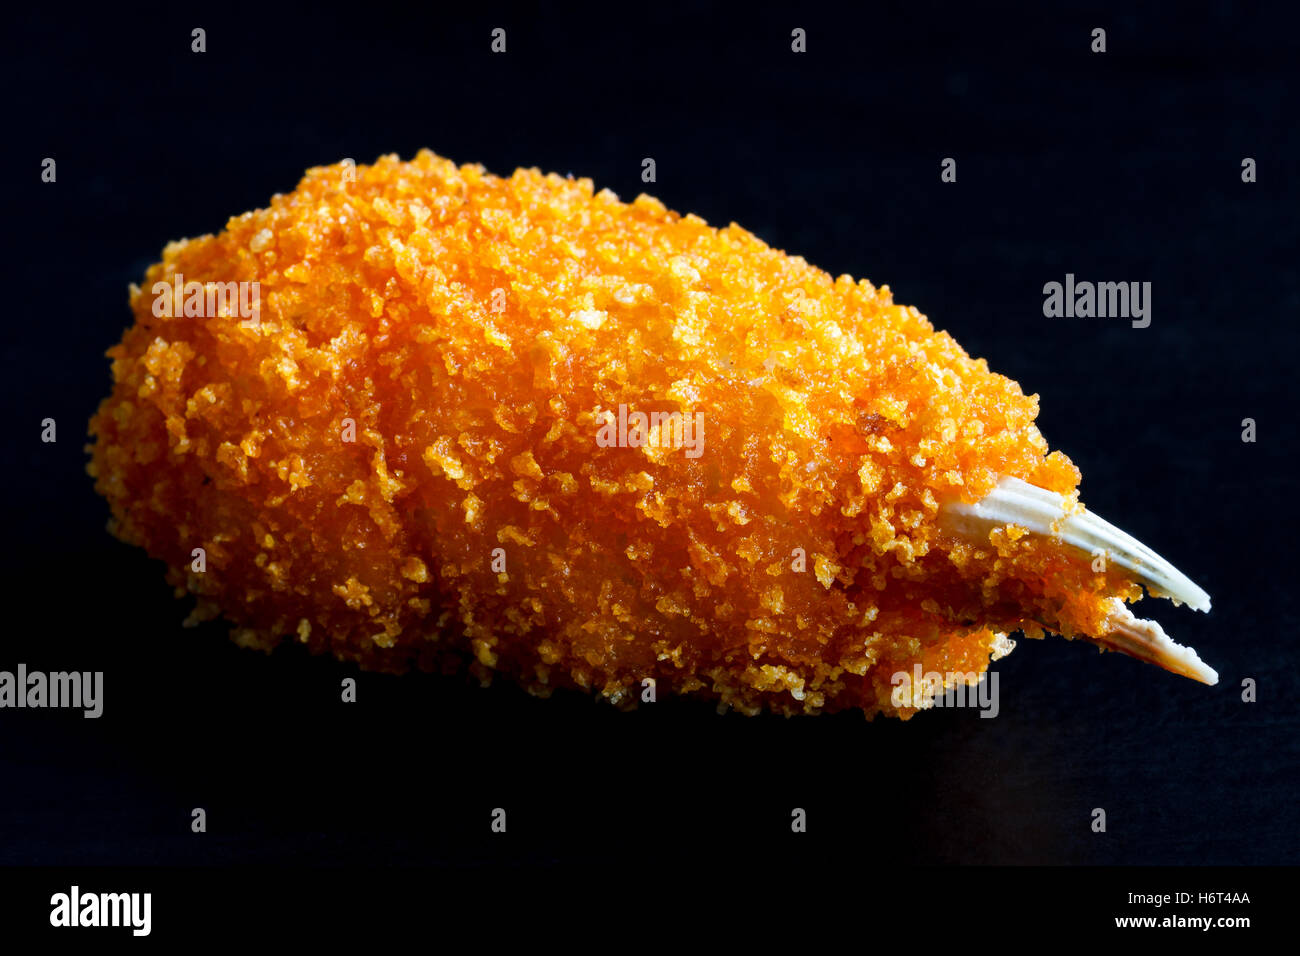 Detail of a fried breaded surimi crab claw isolated on black in perspective. Stock Photo